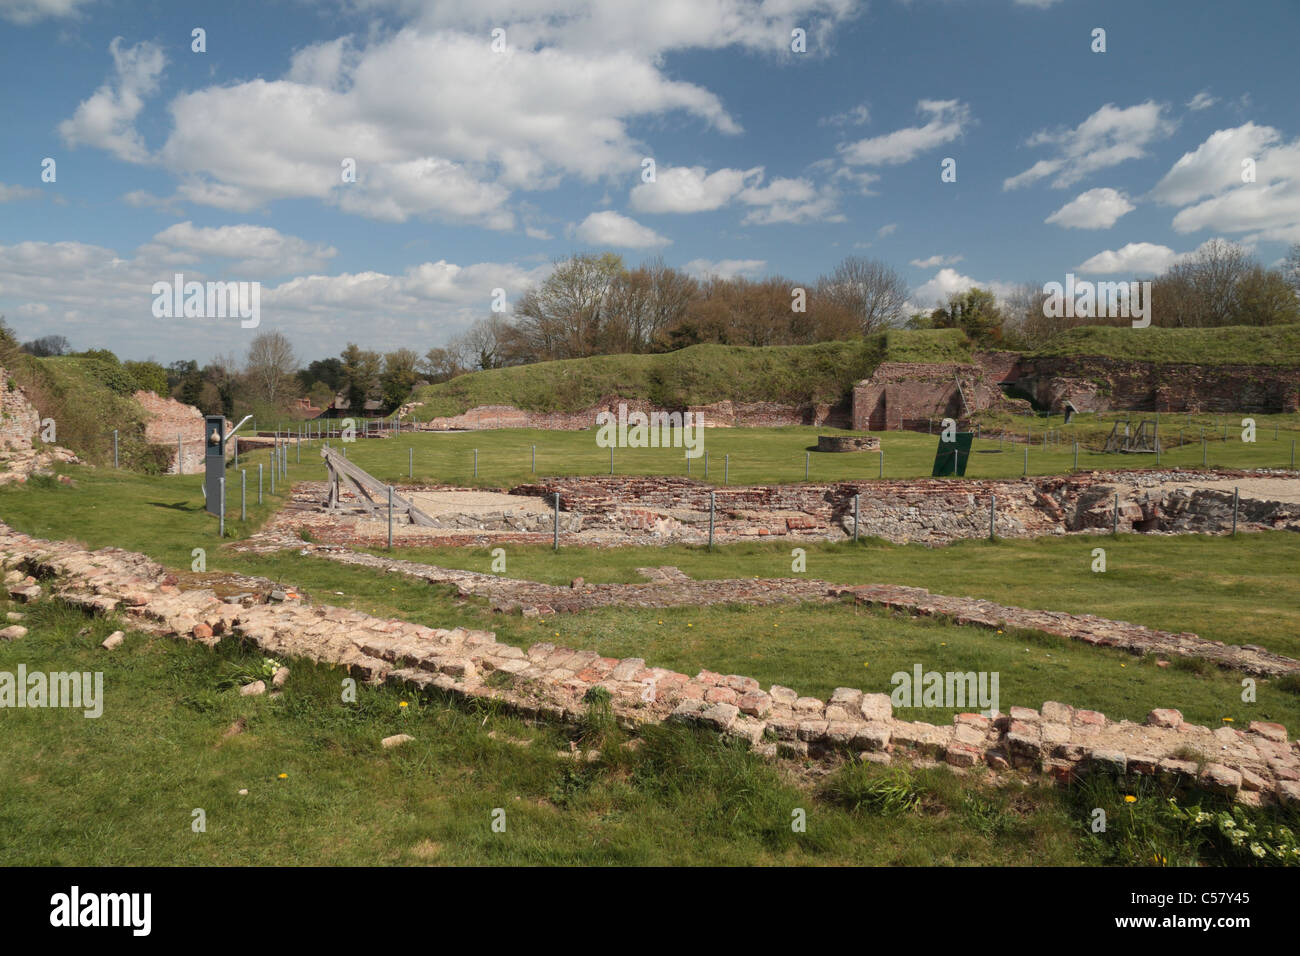 VIew over the remains of the wine cellar of the Great Hall in the grounds of  Basing House, Old Basing, Hampshire, UK. Stock Photo